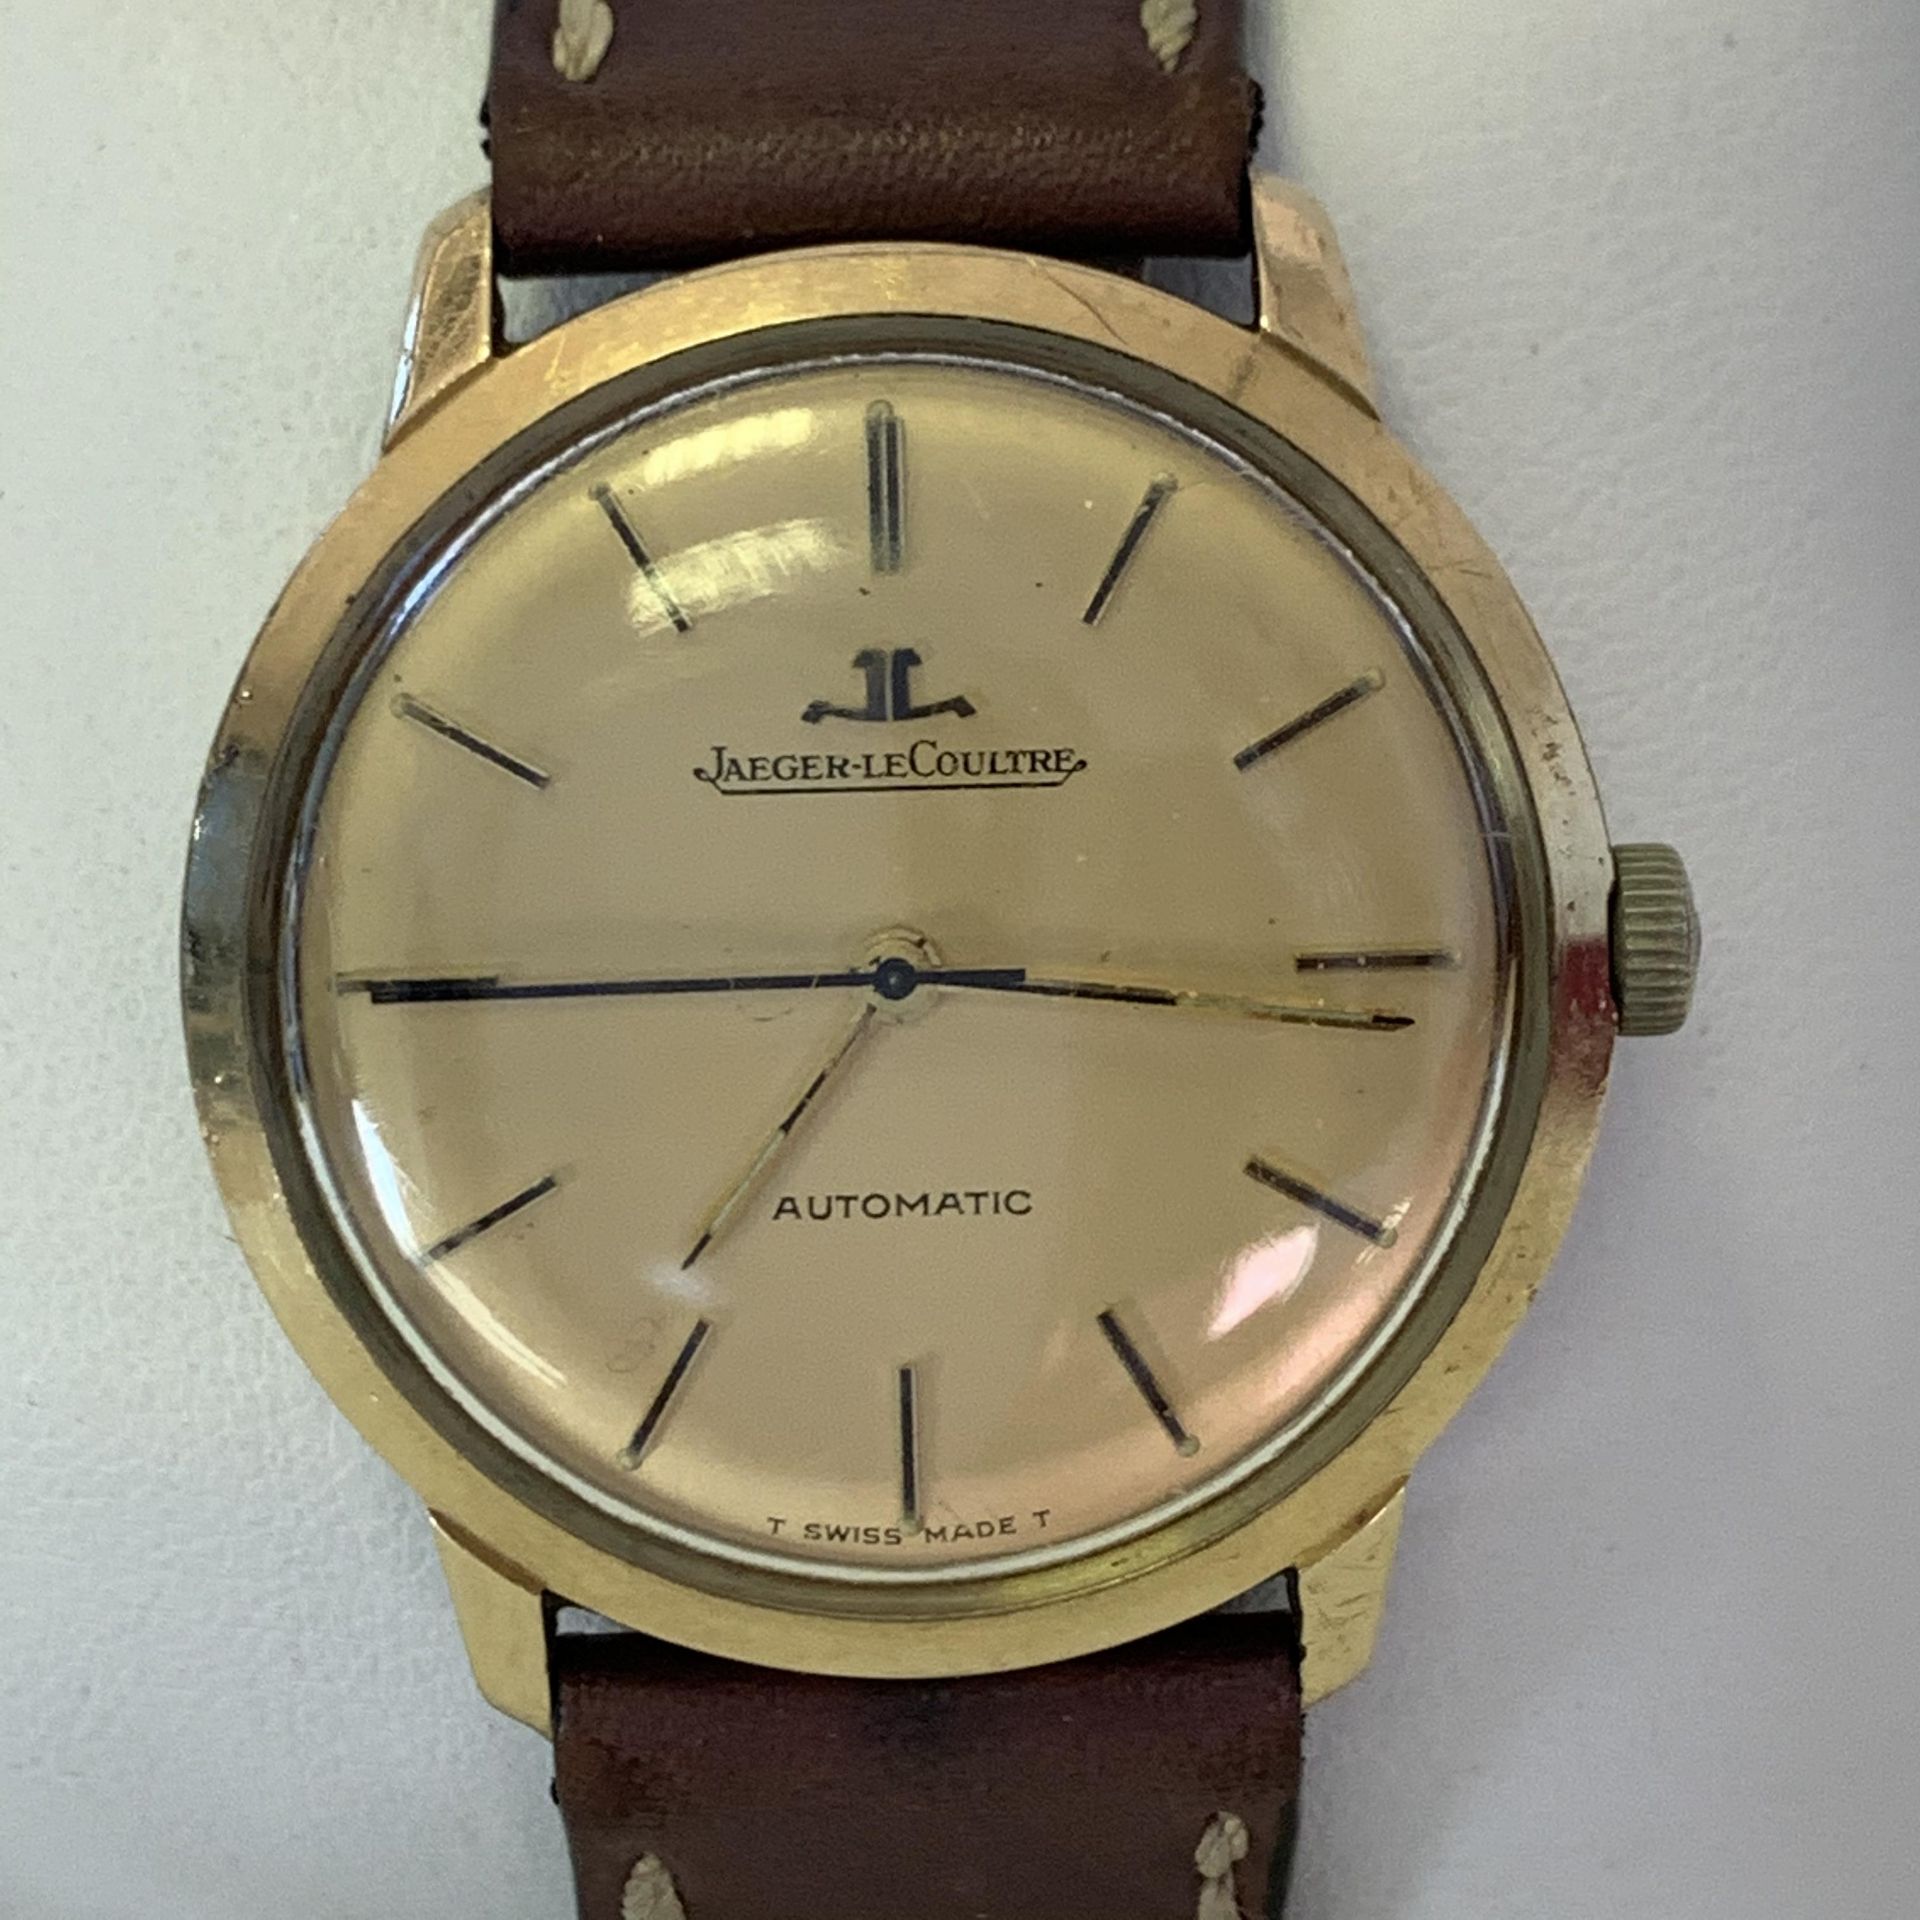 Gentleman's Jaeger Le Couture wrist watch in 9ct gold case, approximately 12. - Image 2 of 4